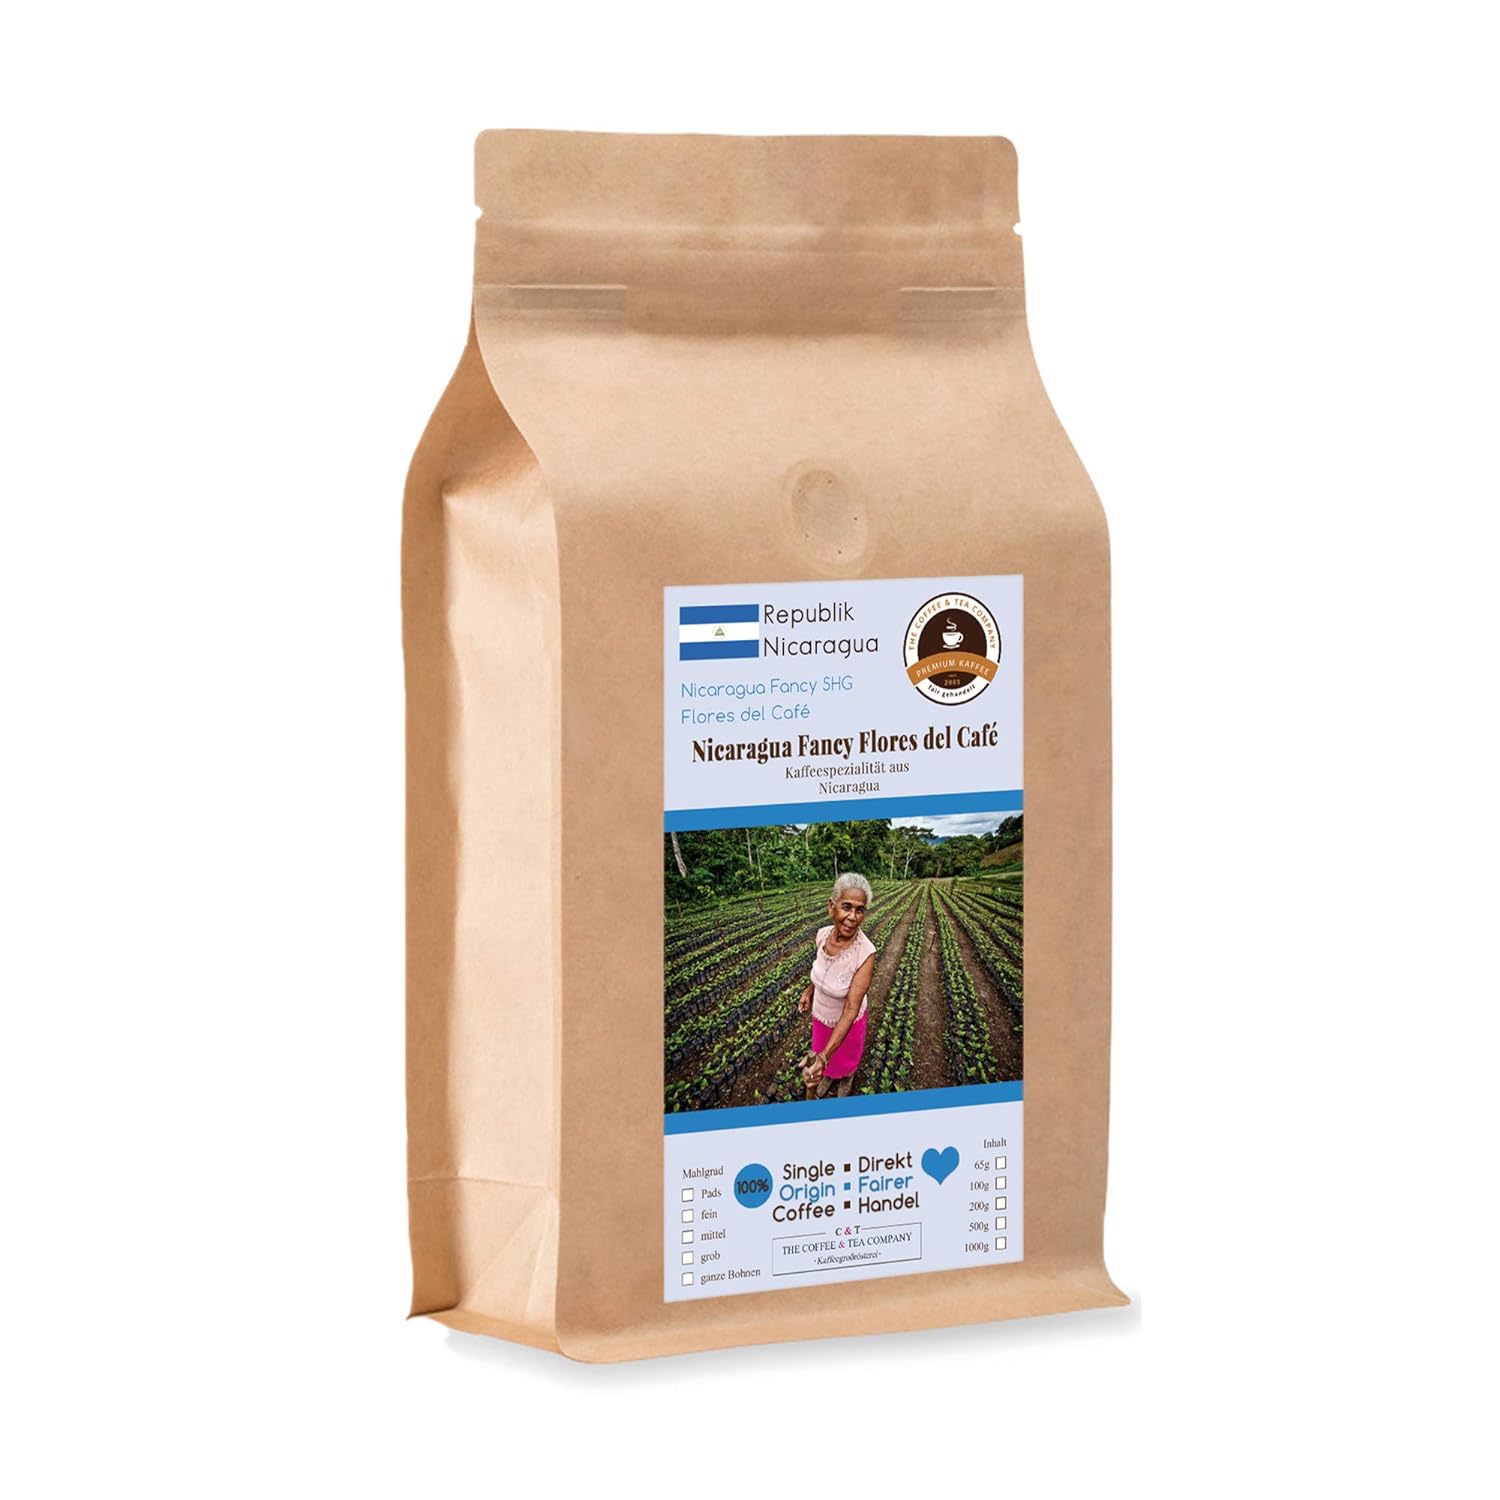 Coffee Globetrotter - Coffee with Heart - Nicaragua Fancy Flores del Café - 500 g Medium Ground - Top Coffee from the Women's Fund Project Fair Trade Supports Social Projects